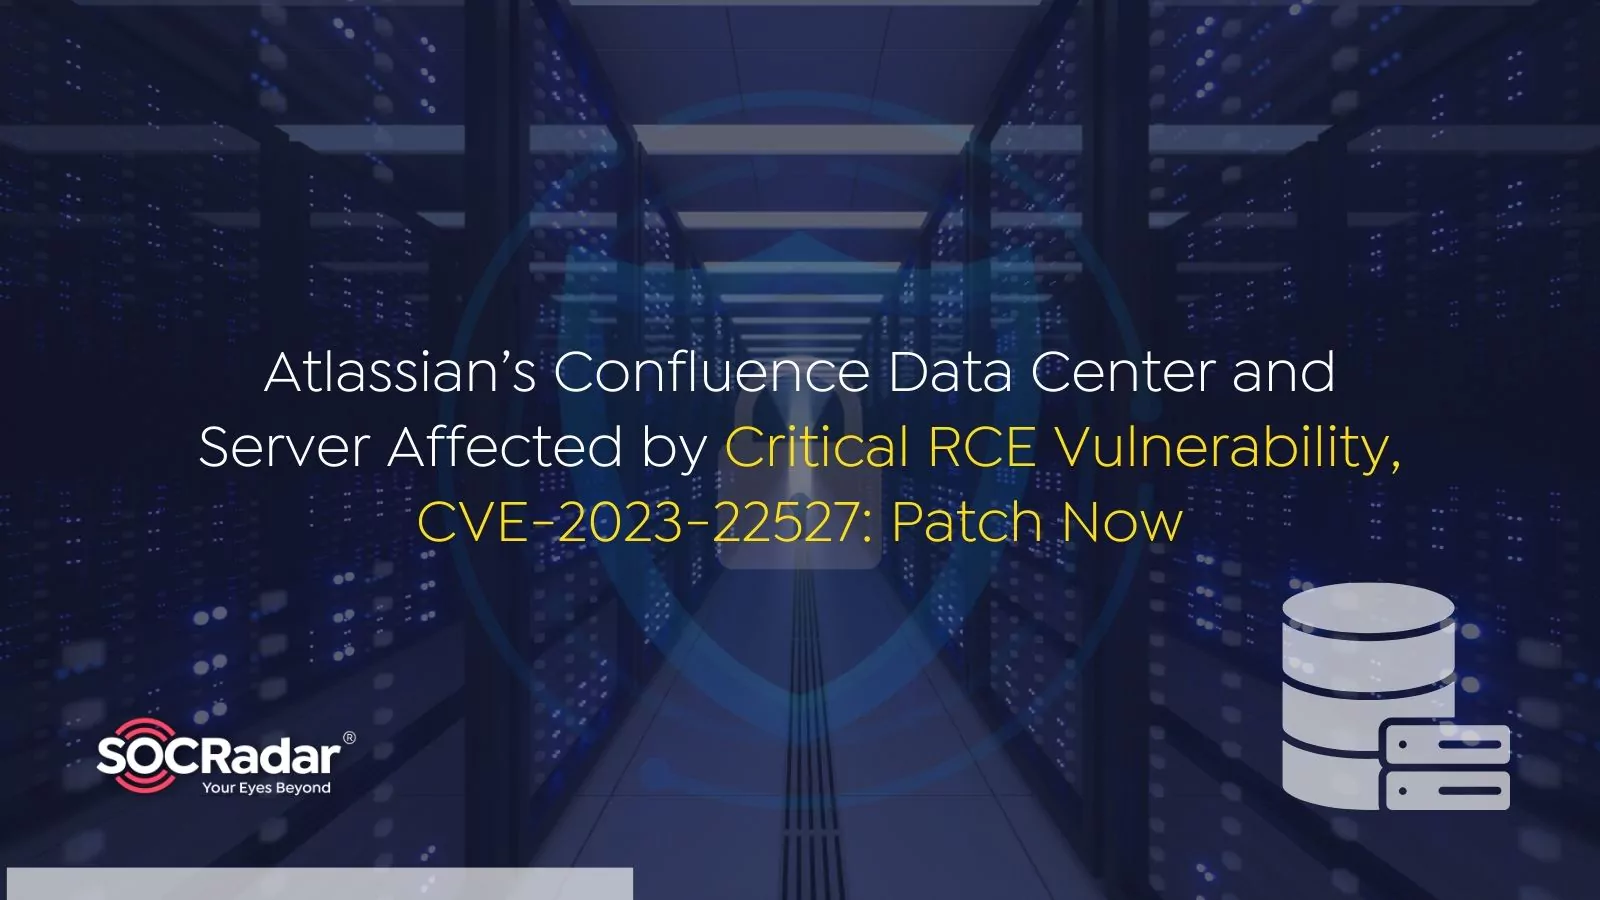 SOCRadar® Cyber Intelligence Inc. | Atlassian’s Confluence Data Center and Server Affected by Critical RCE Vulnerability, CVE-2023-22527: Patch Now